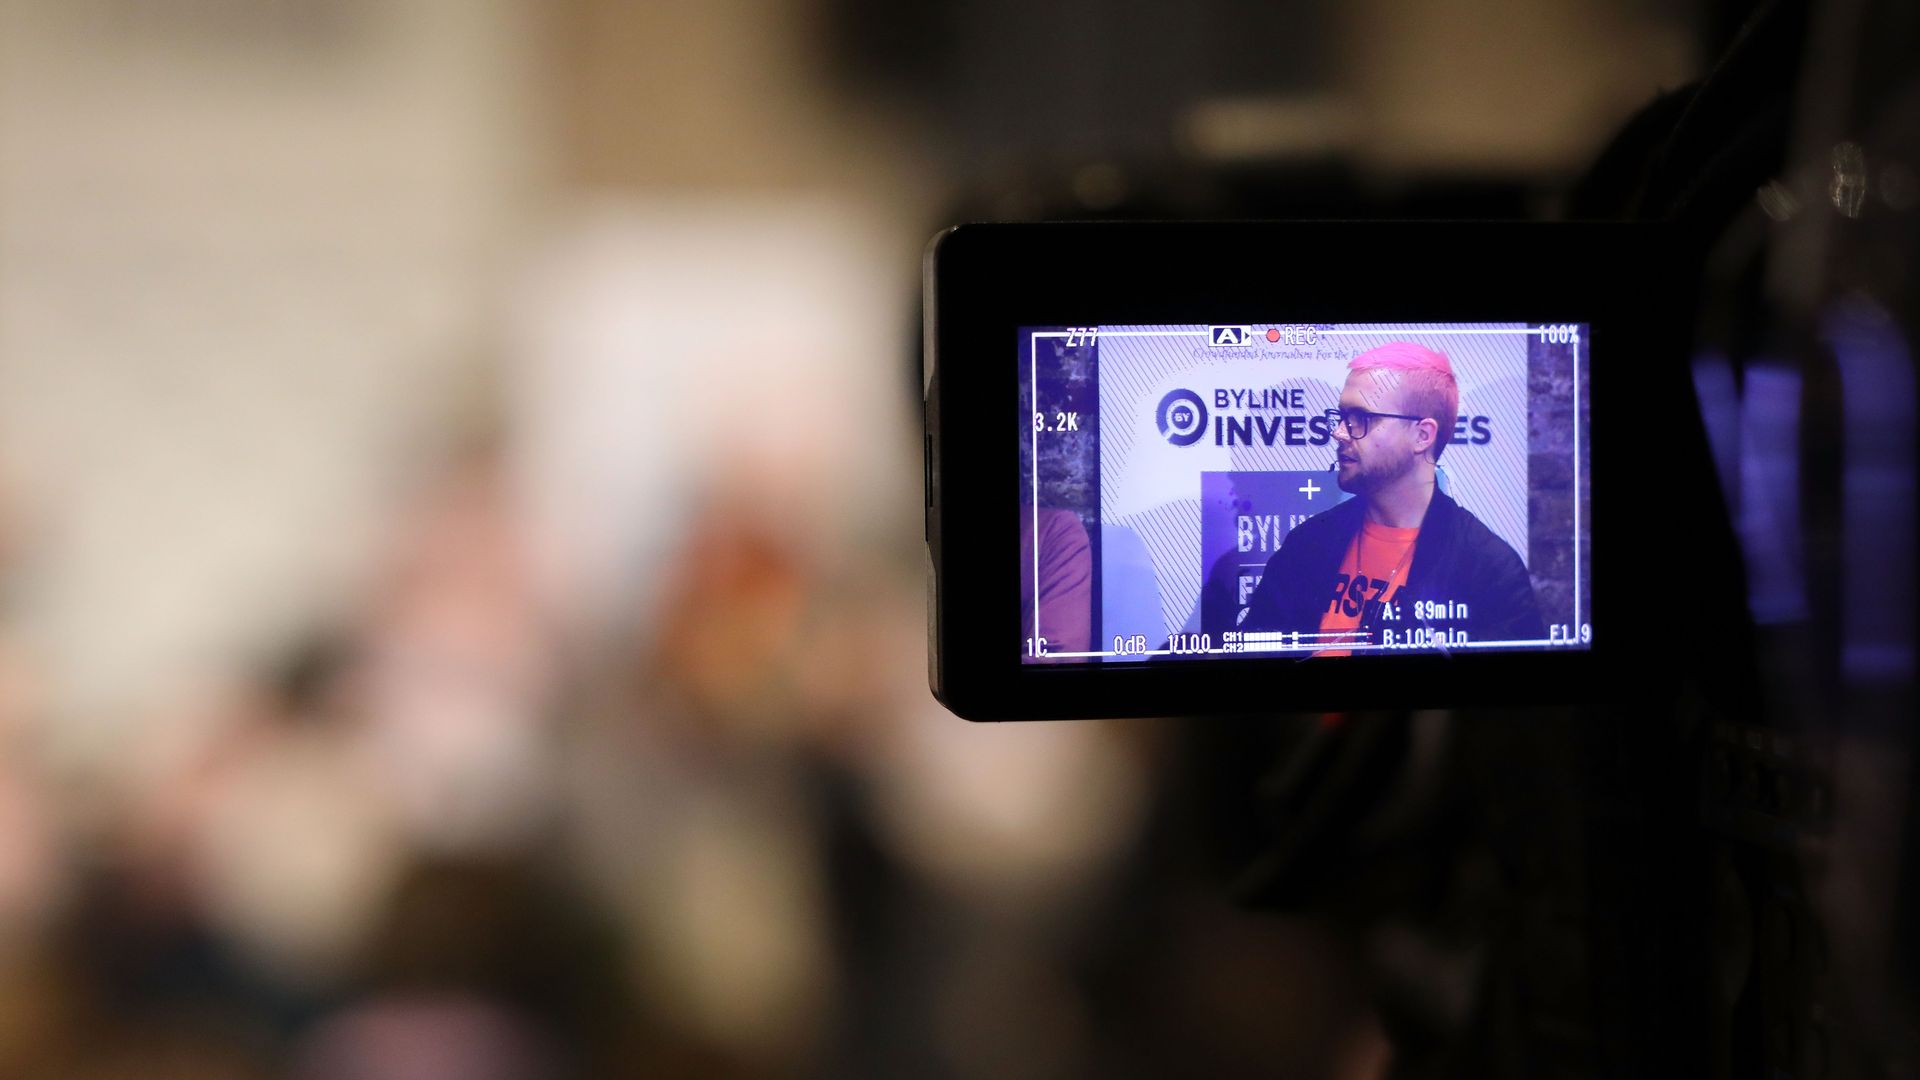 Christopher Wylie is shown on the screen of a video camera